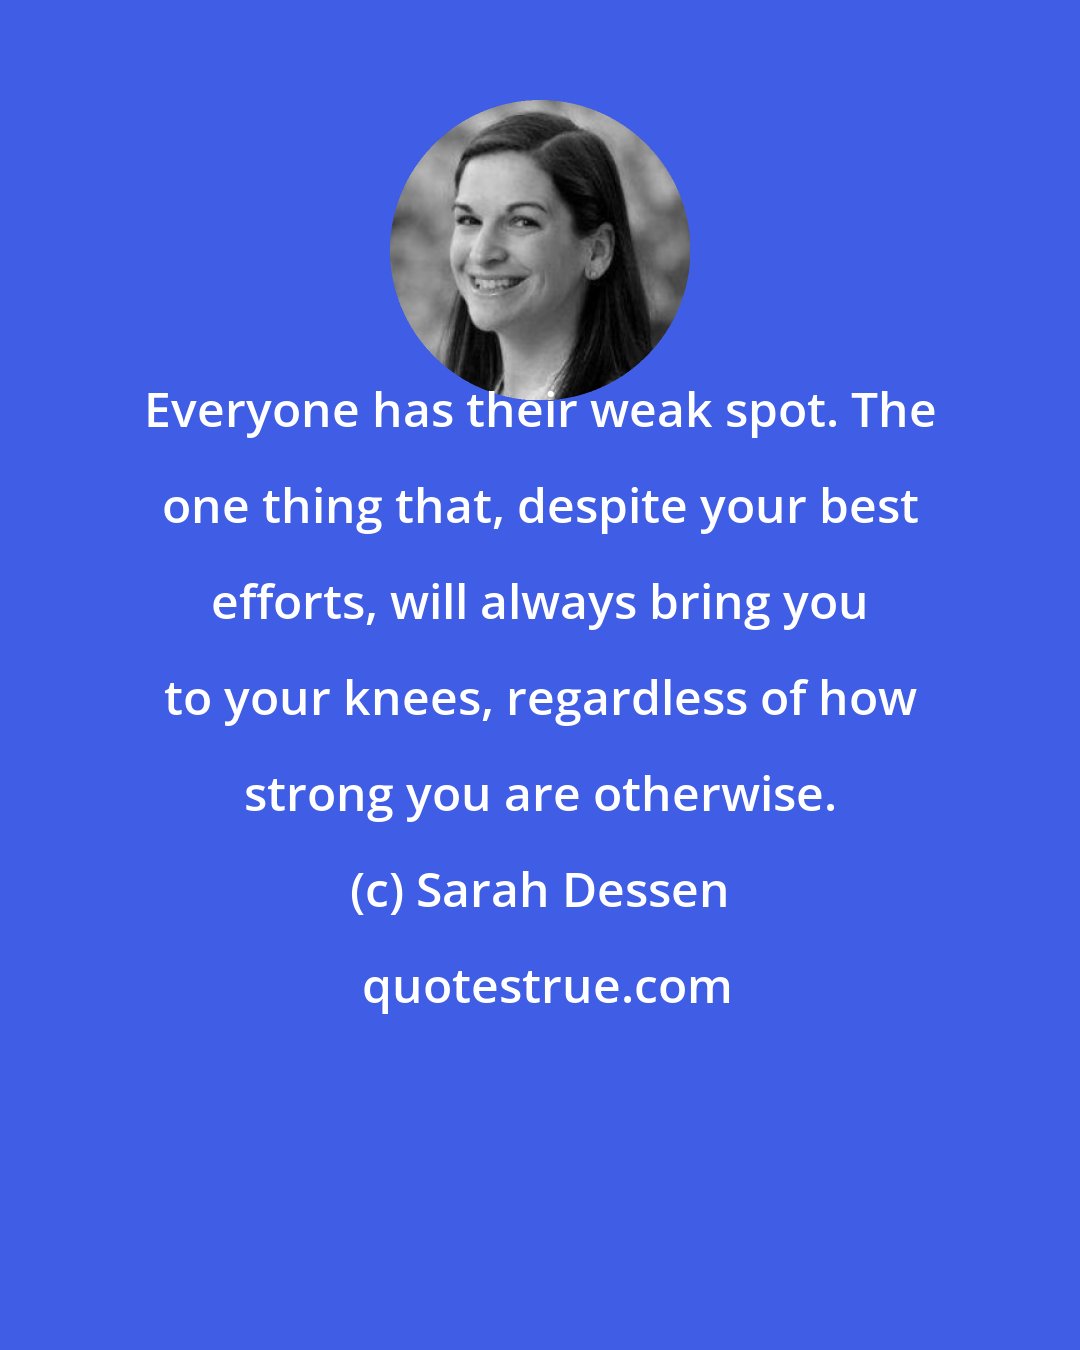 Sarah Dessen: Everyone has their weak spot. The one thing that, despite your best efforts, will always bring you to your knees, regardless of how strong you are otherwise.